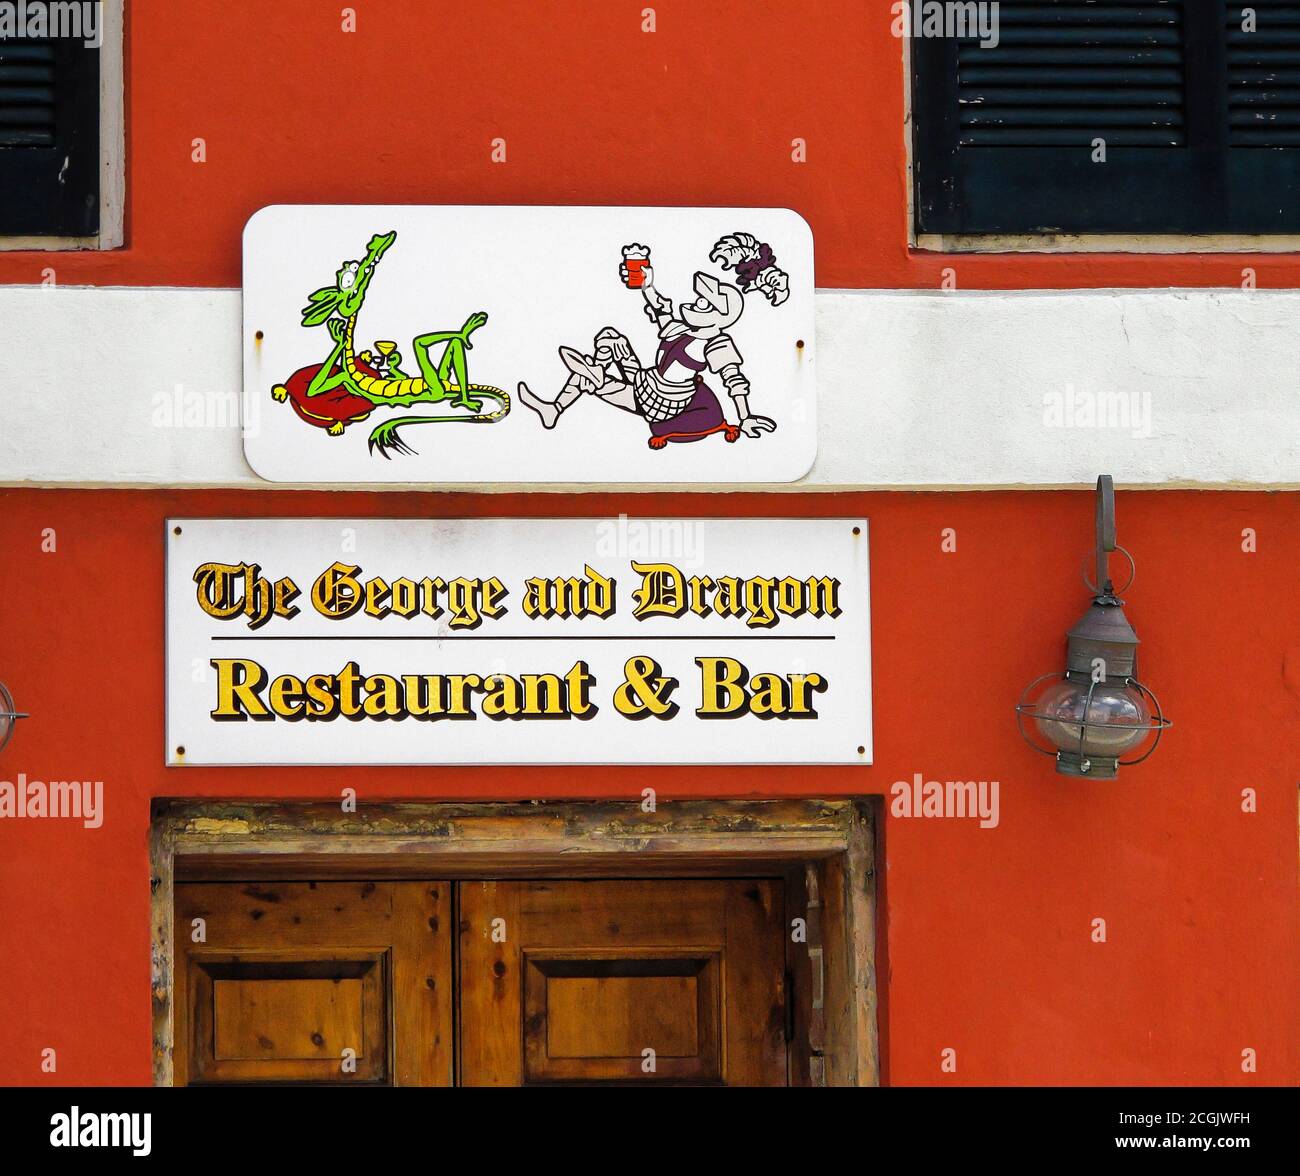 The George and Dragon Restaurant & Bar, sign over door, knight and dragon cartoon, red building, business; St. George; Bermuda Stock Photo